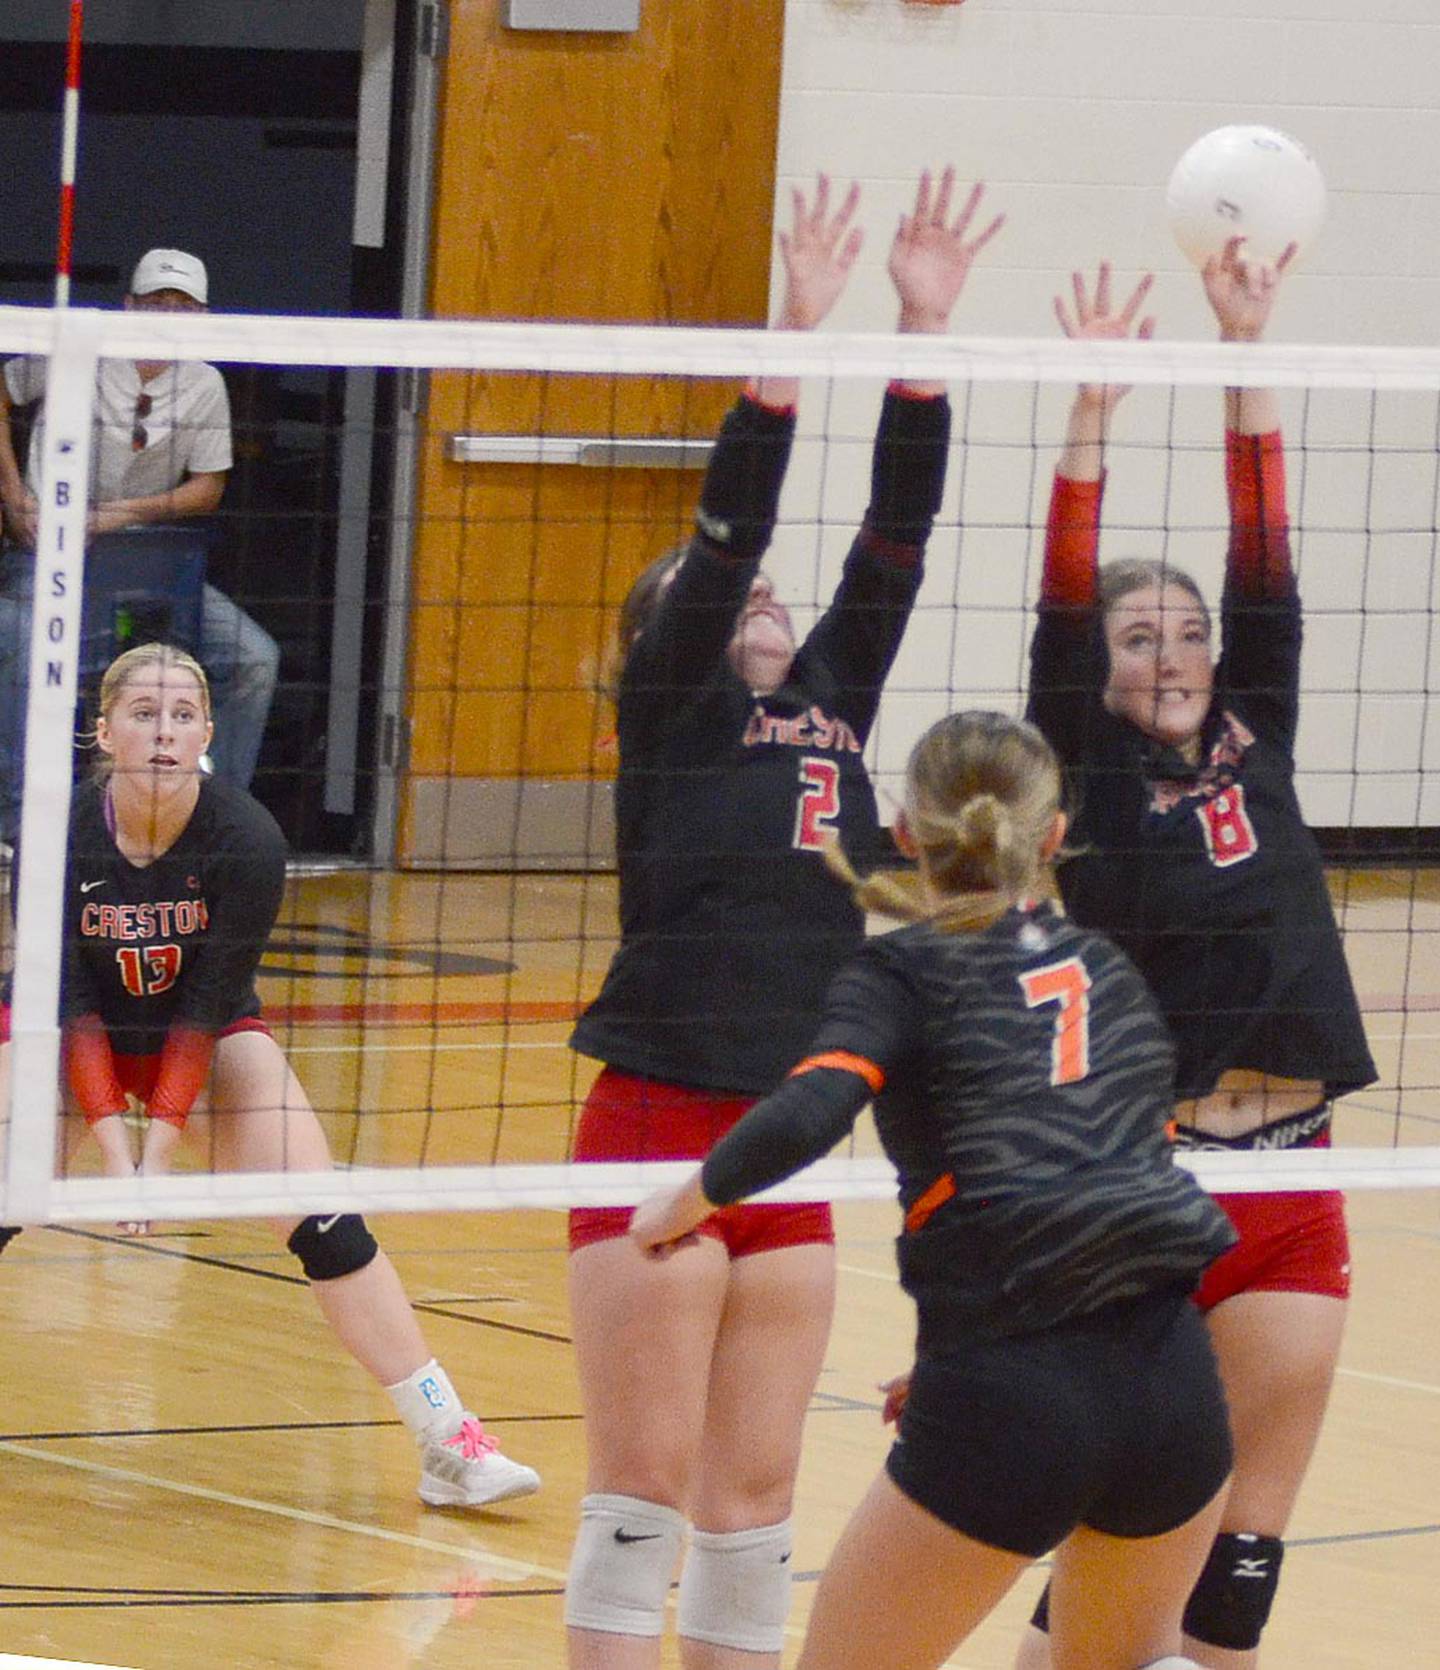 Red Oak's Merced Ramirez (7) hits against the block attempt of Creston's Hollyn Rieck (2) and Ady Morrison (8) during Thursday's match.